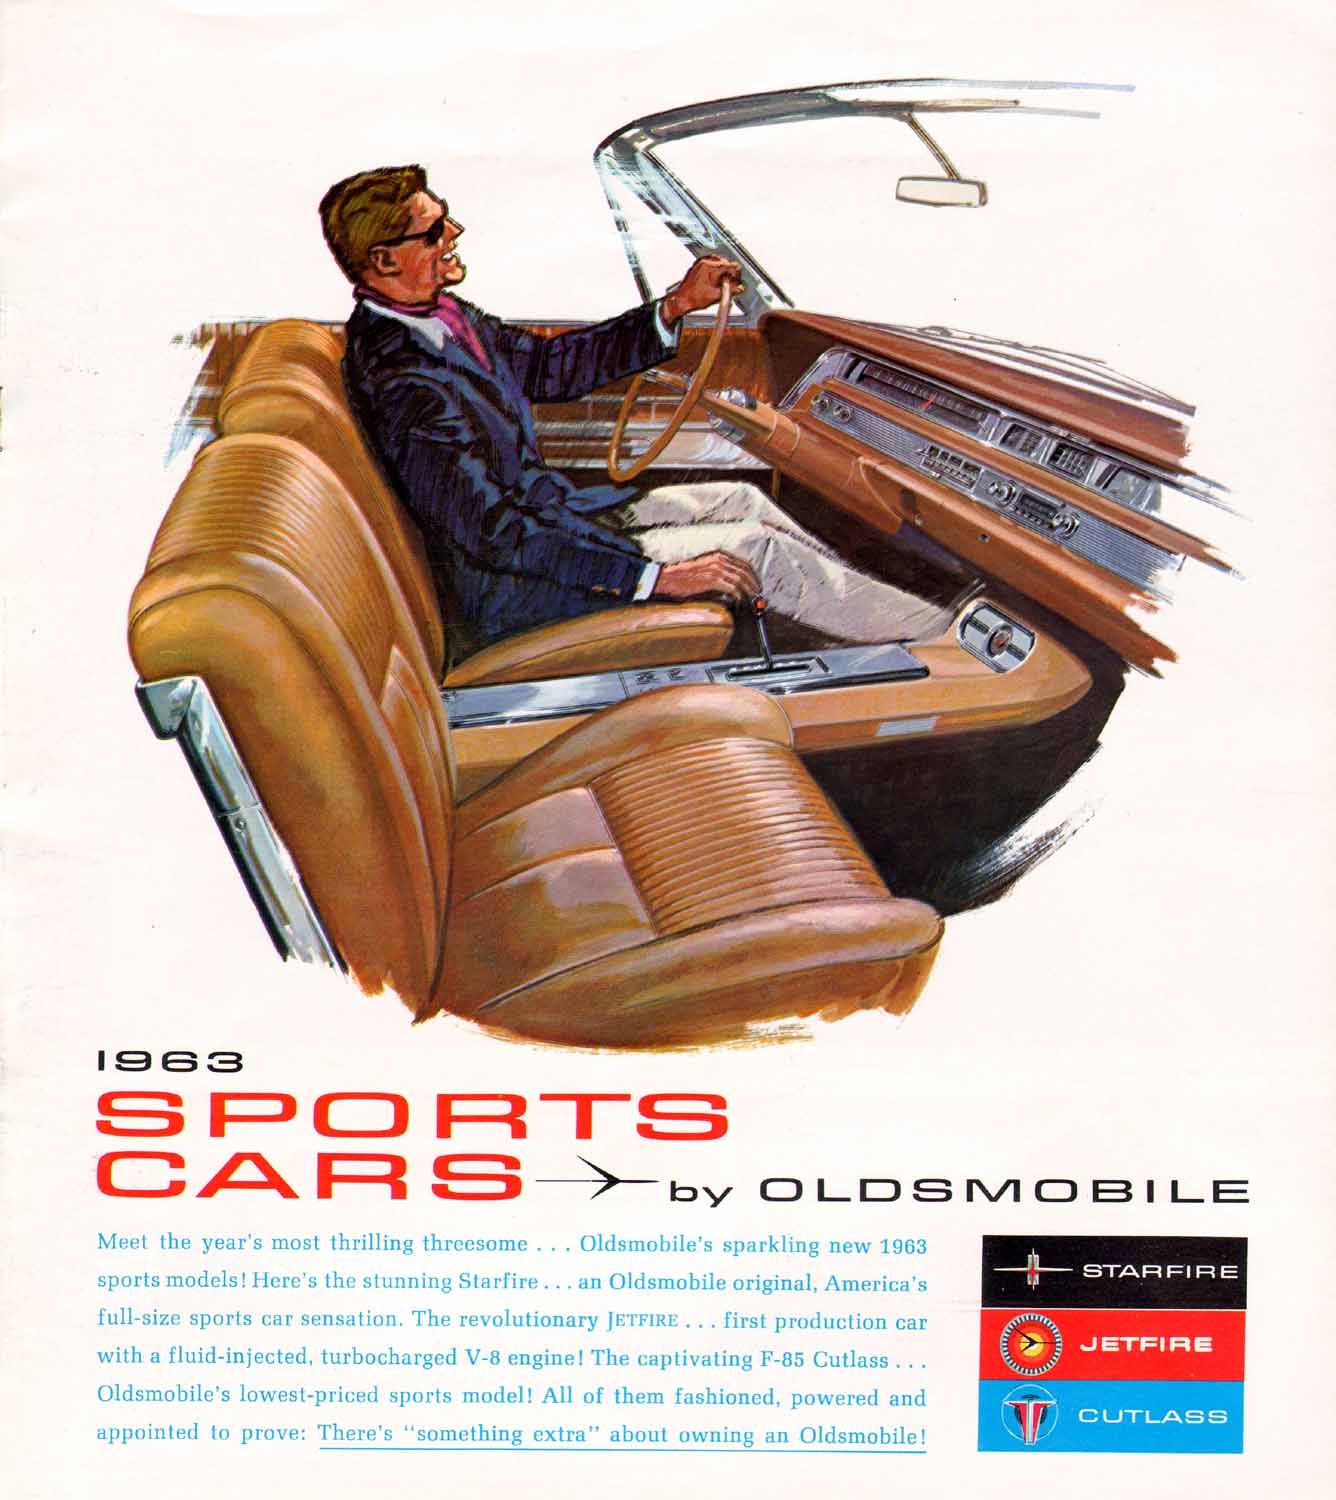 1963 Oldsmobile Sports Cars Brochure Page 2